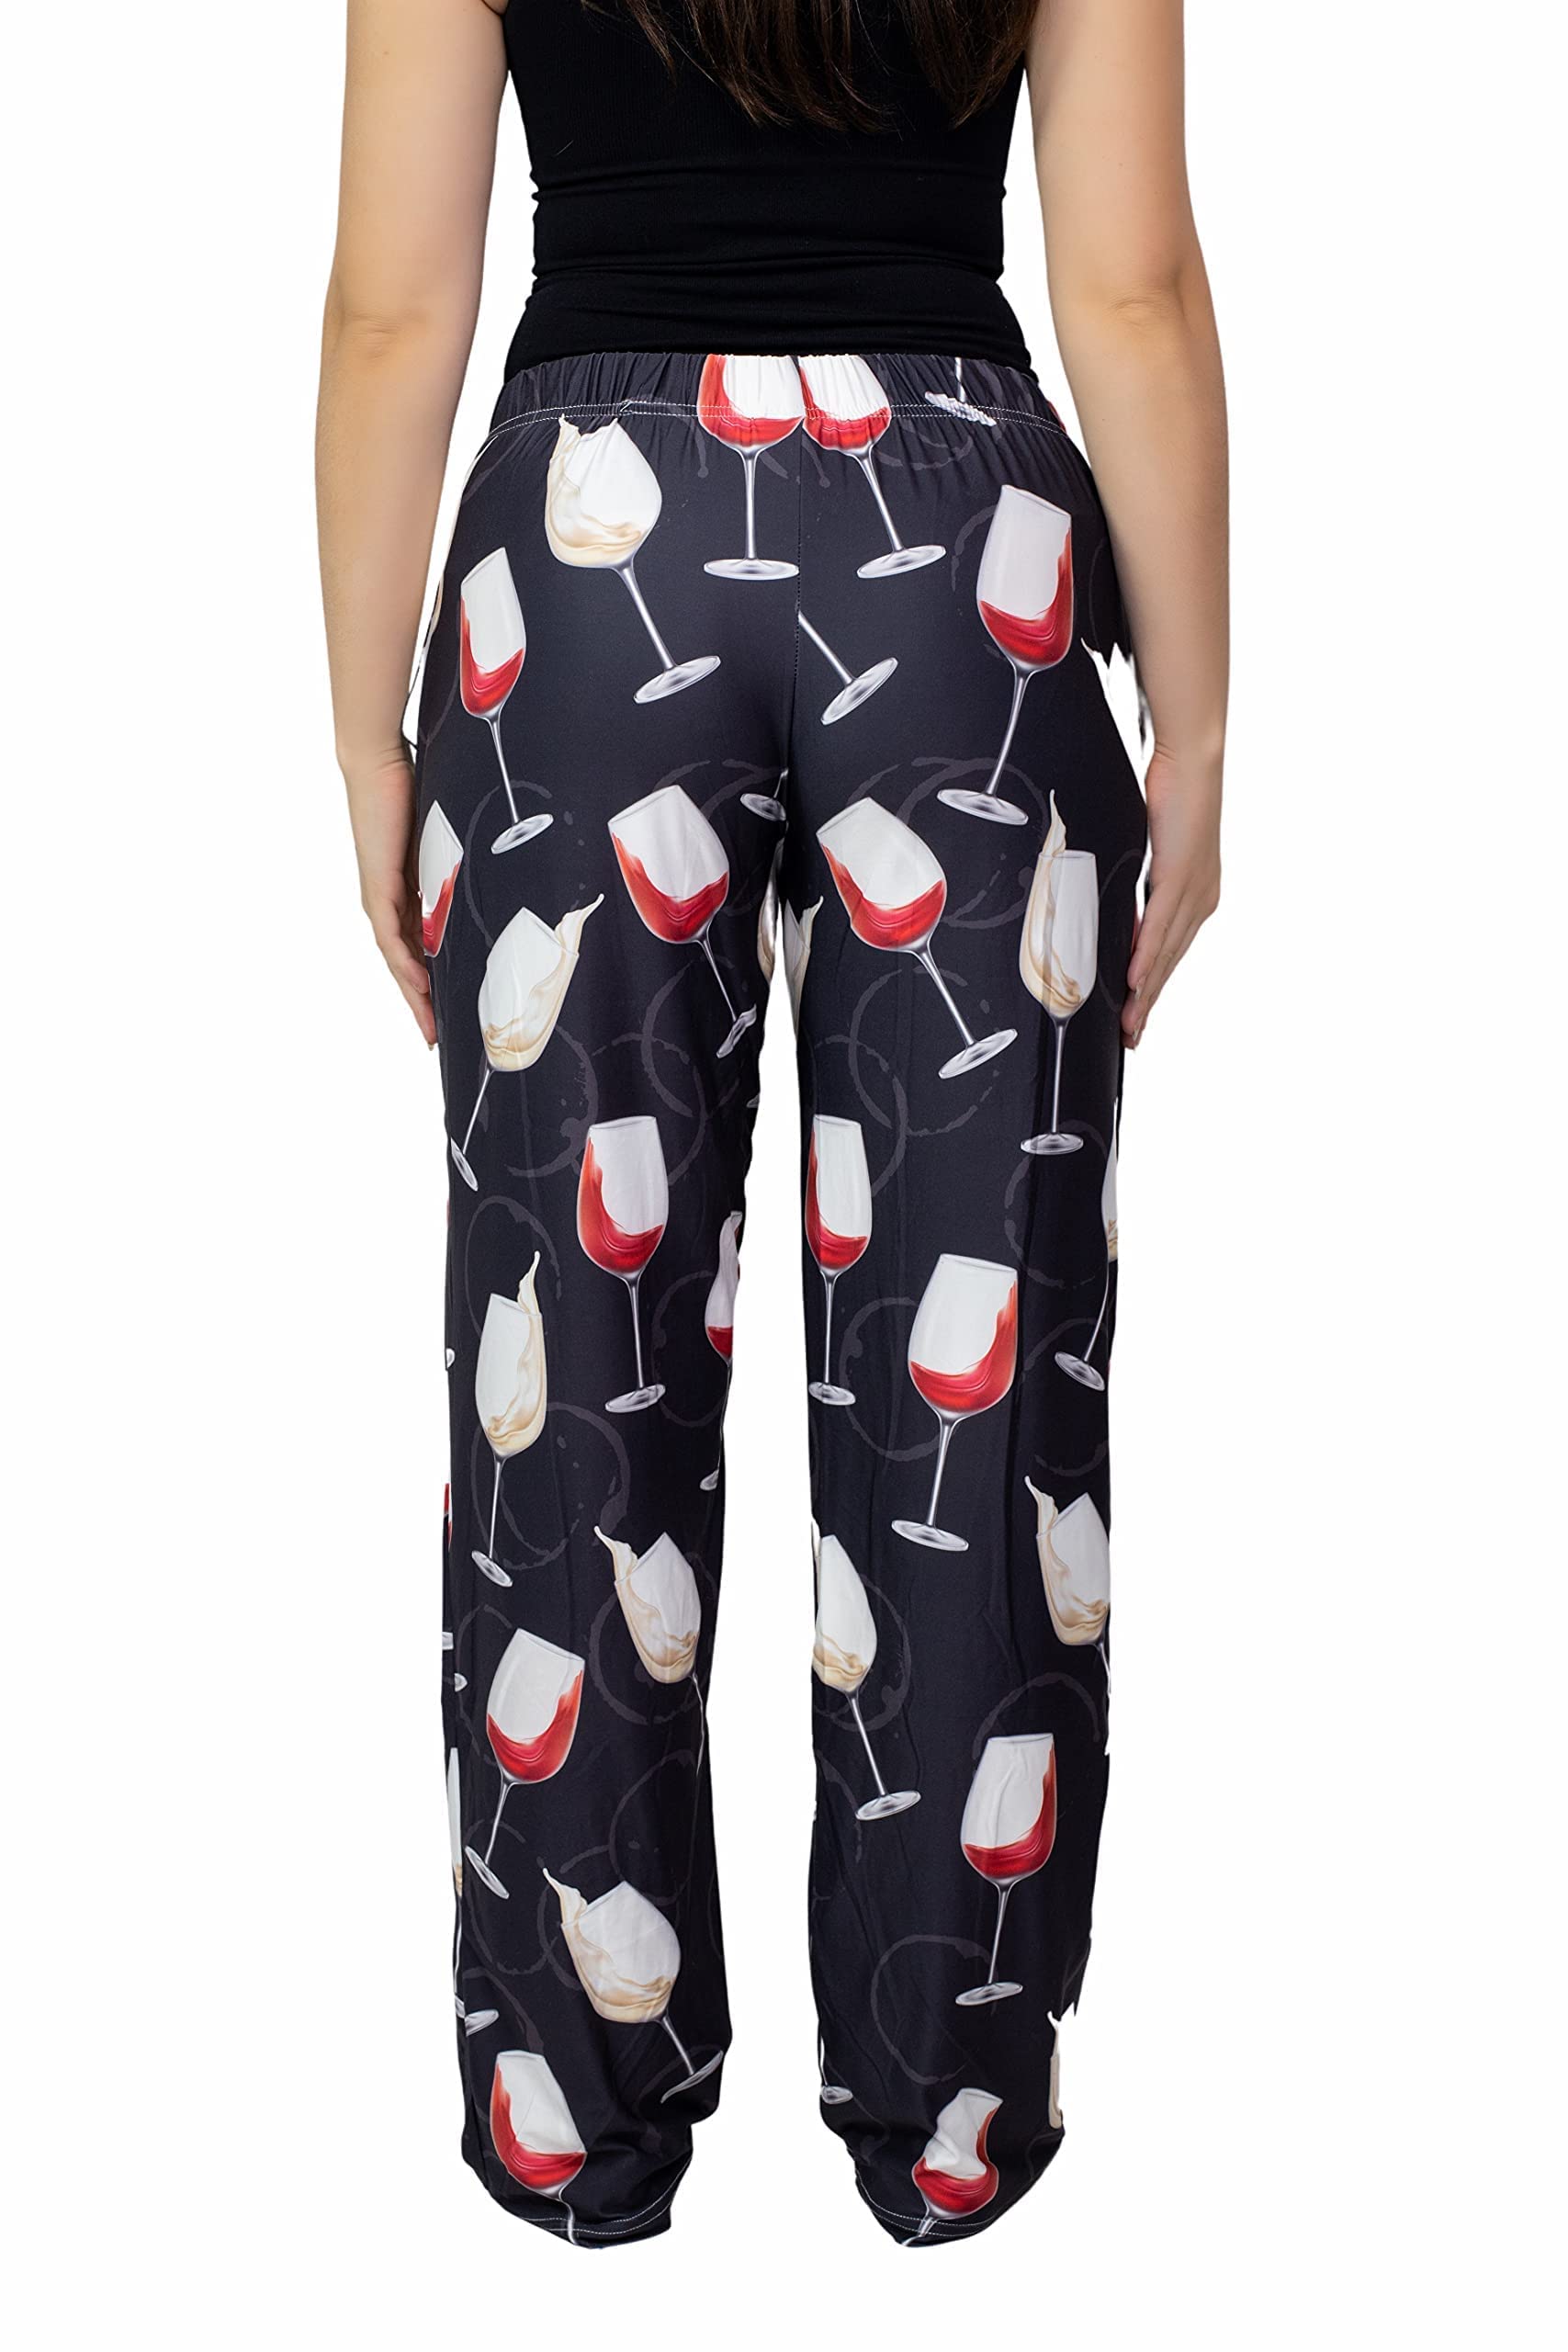 Waist down photo of model wearing You Whine I Wine pajama lounge pants back view (white background)